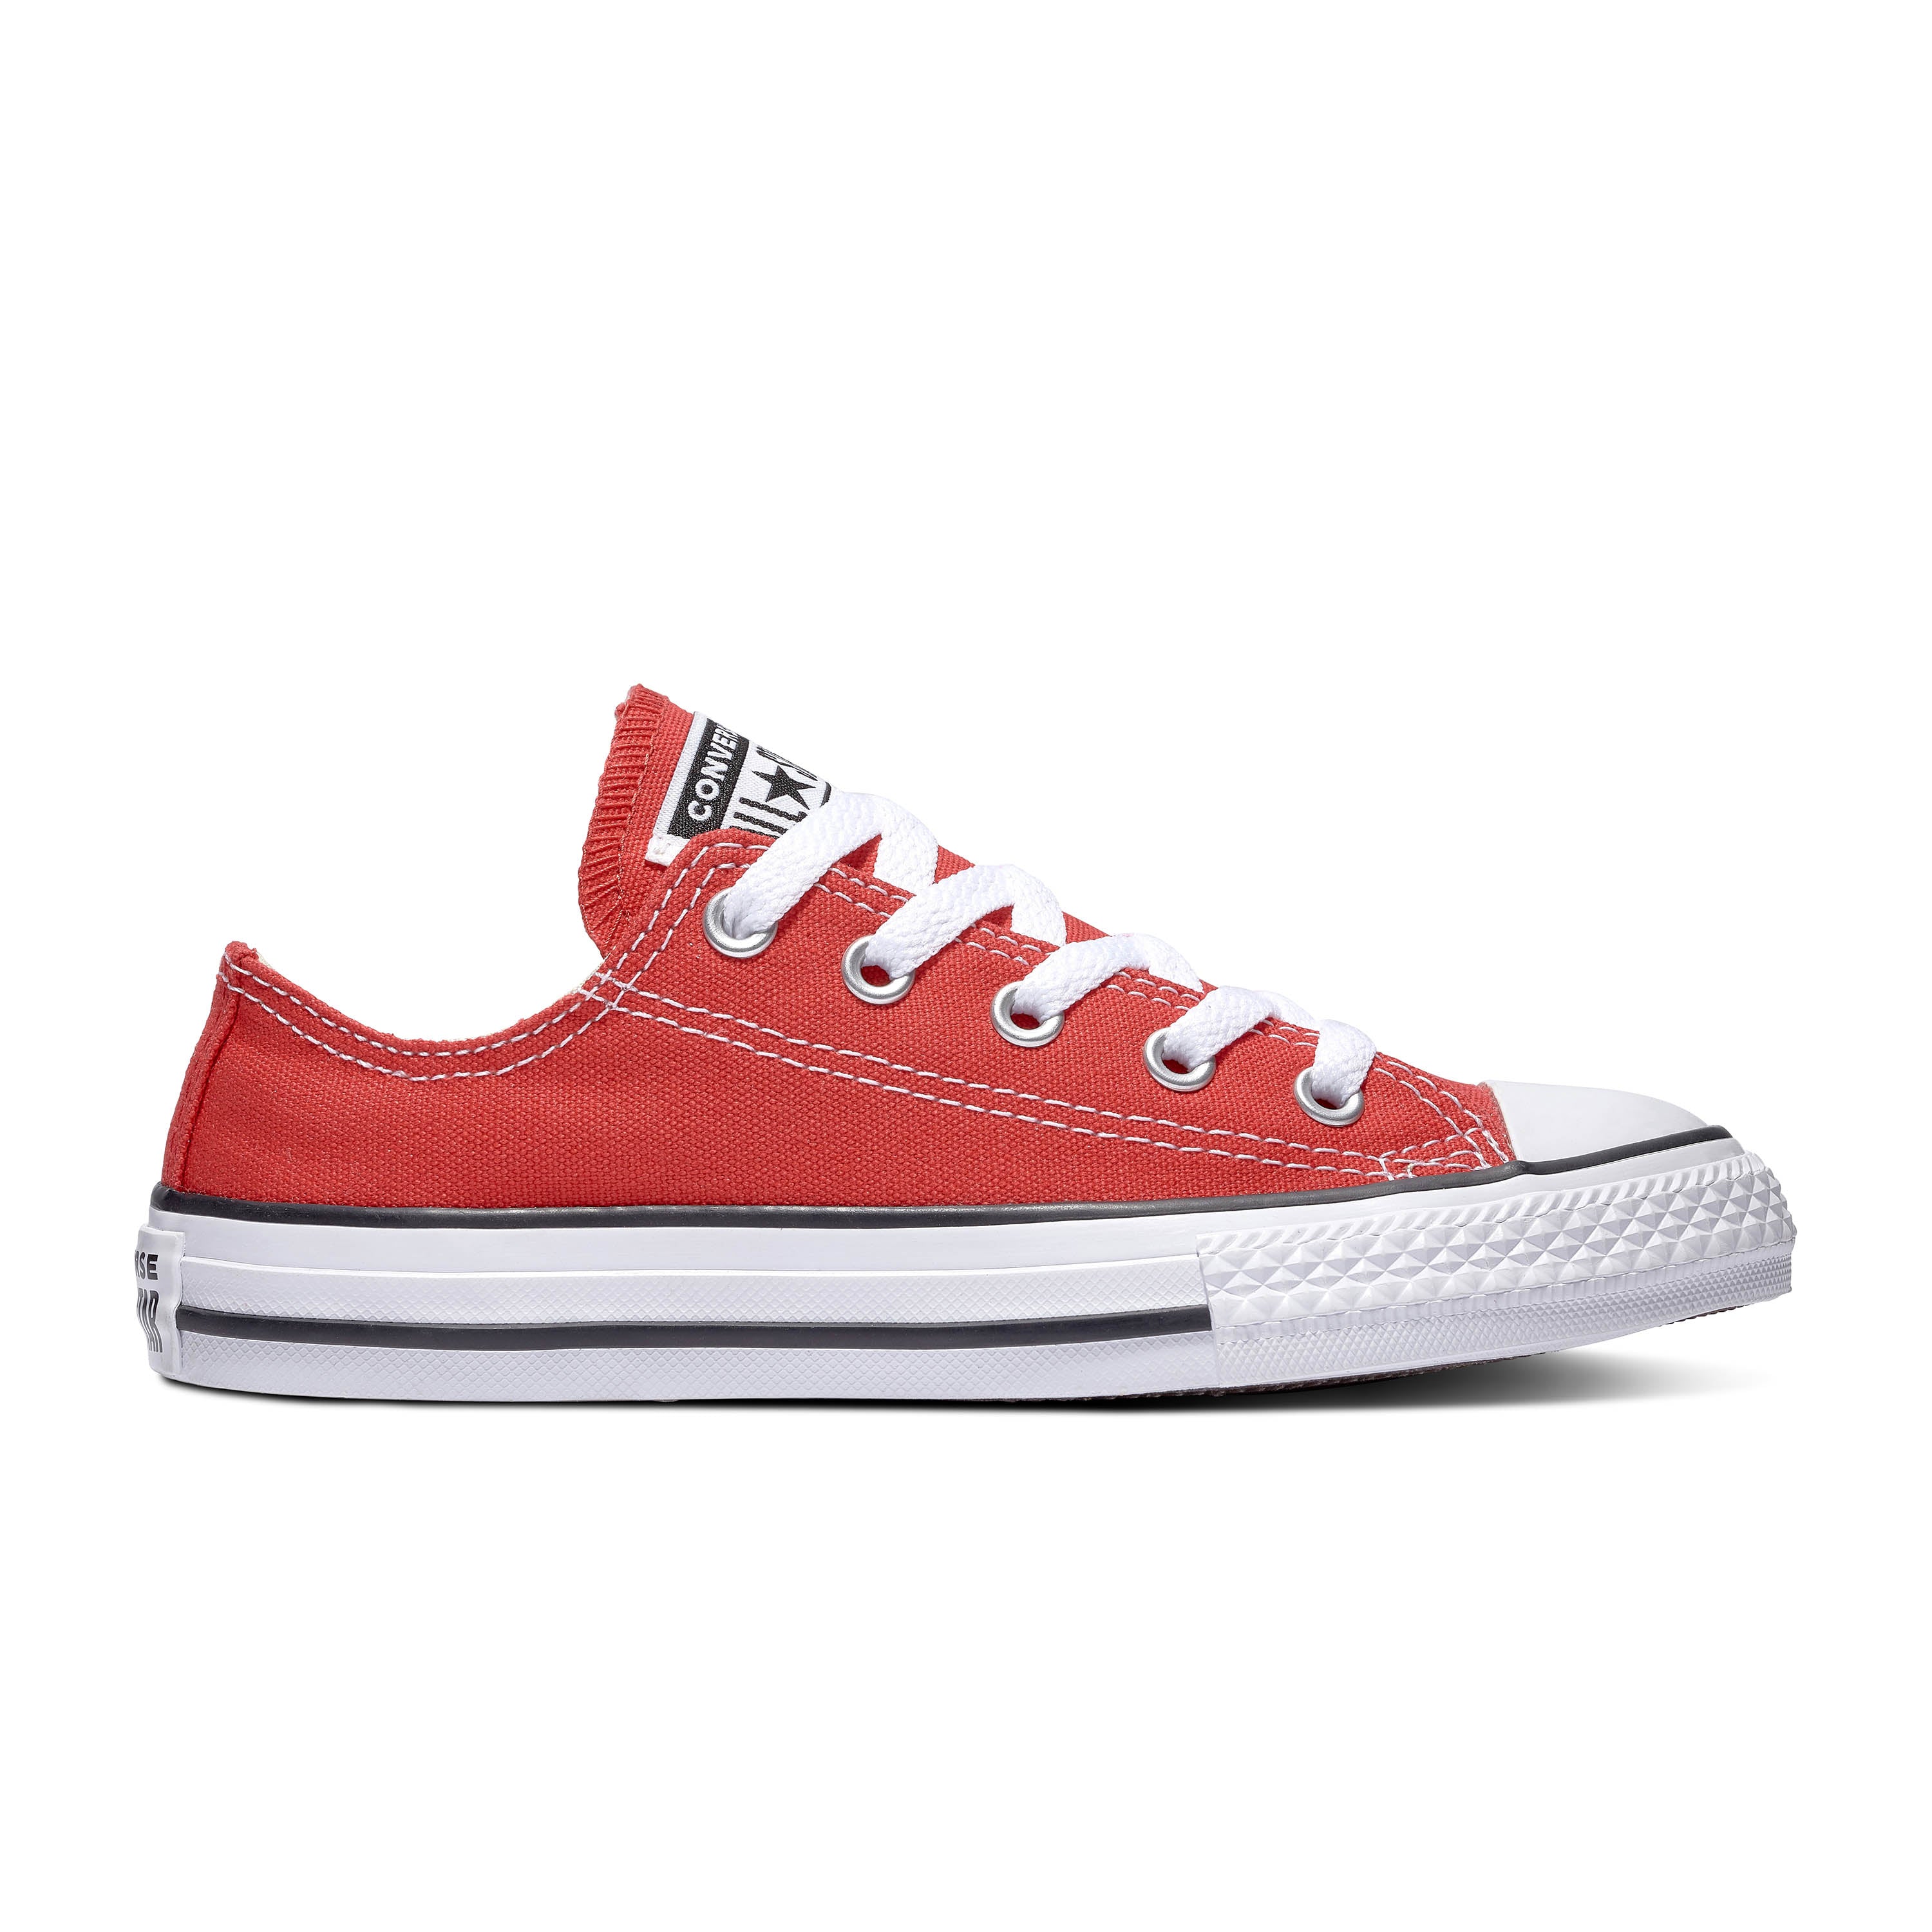 Converse Chuck Taylor All Star Cadet rouge, Sneakers Cadet, Converse